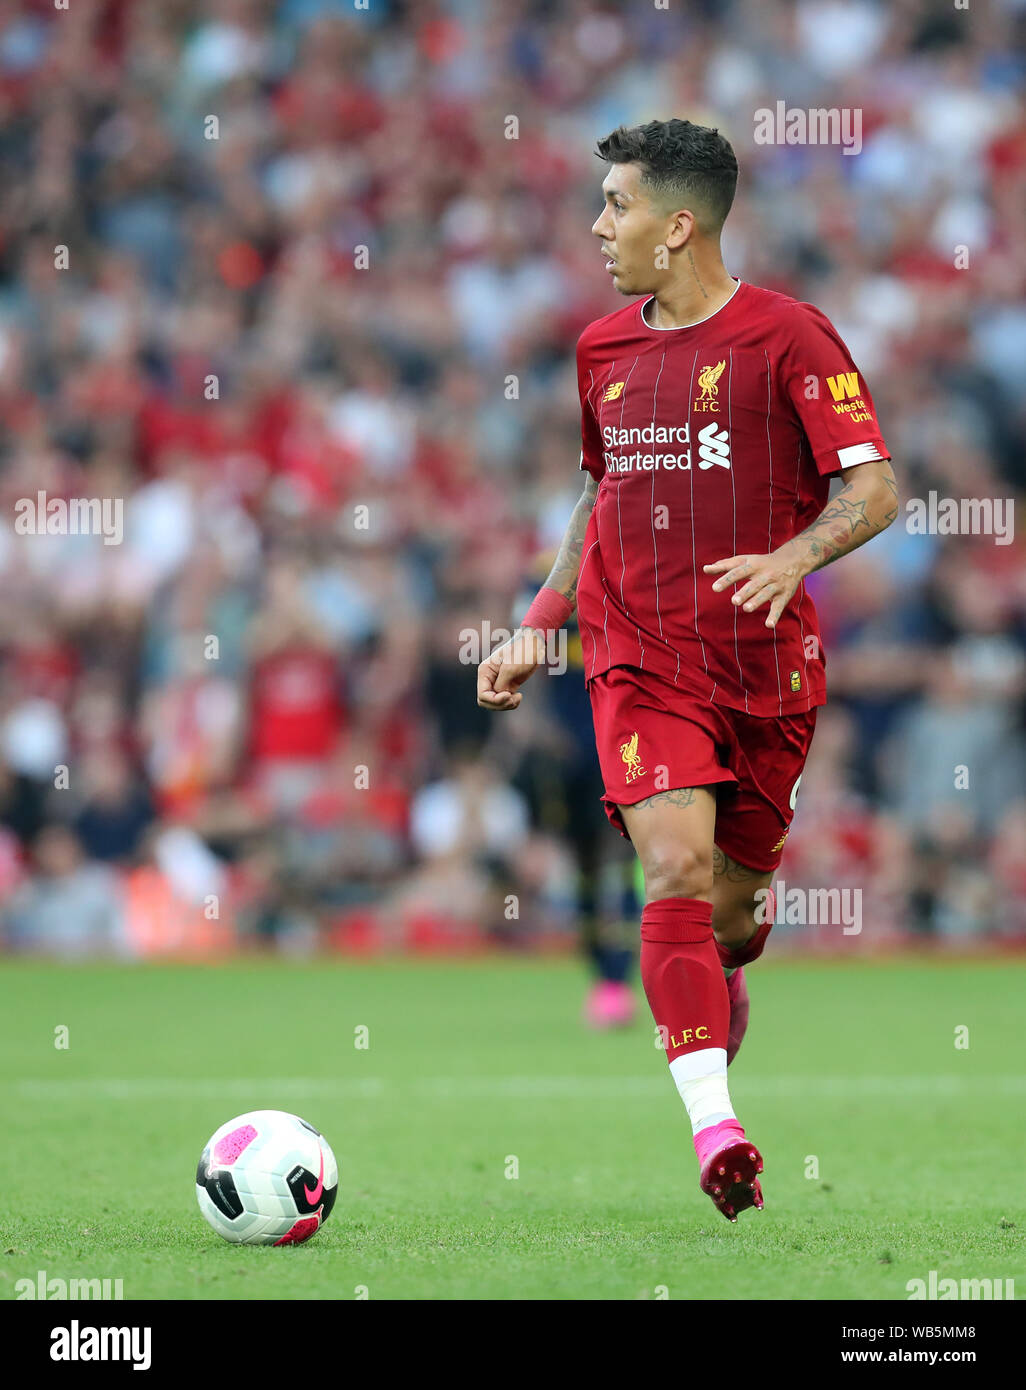 24th August 2019; Anfield, Liverpool, Merseyside, England; English Premier League Football, Liverpool versus Arsenal Football Club; Roberto Firmino of Liverpool looks up for a team mate before making a pass